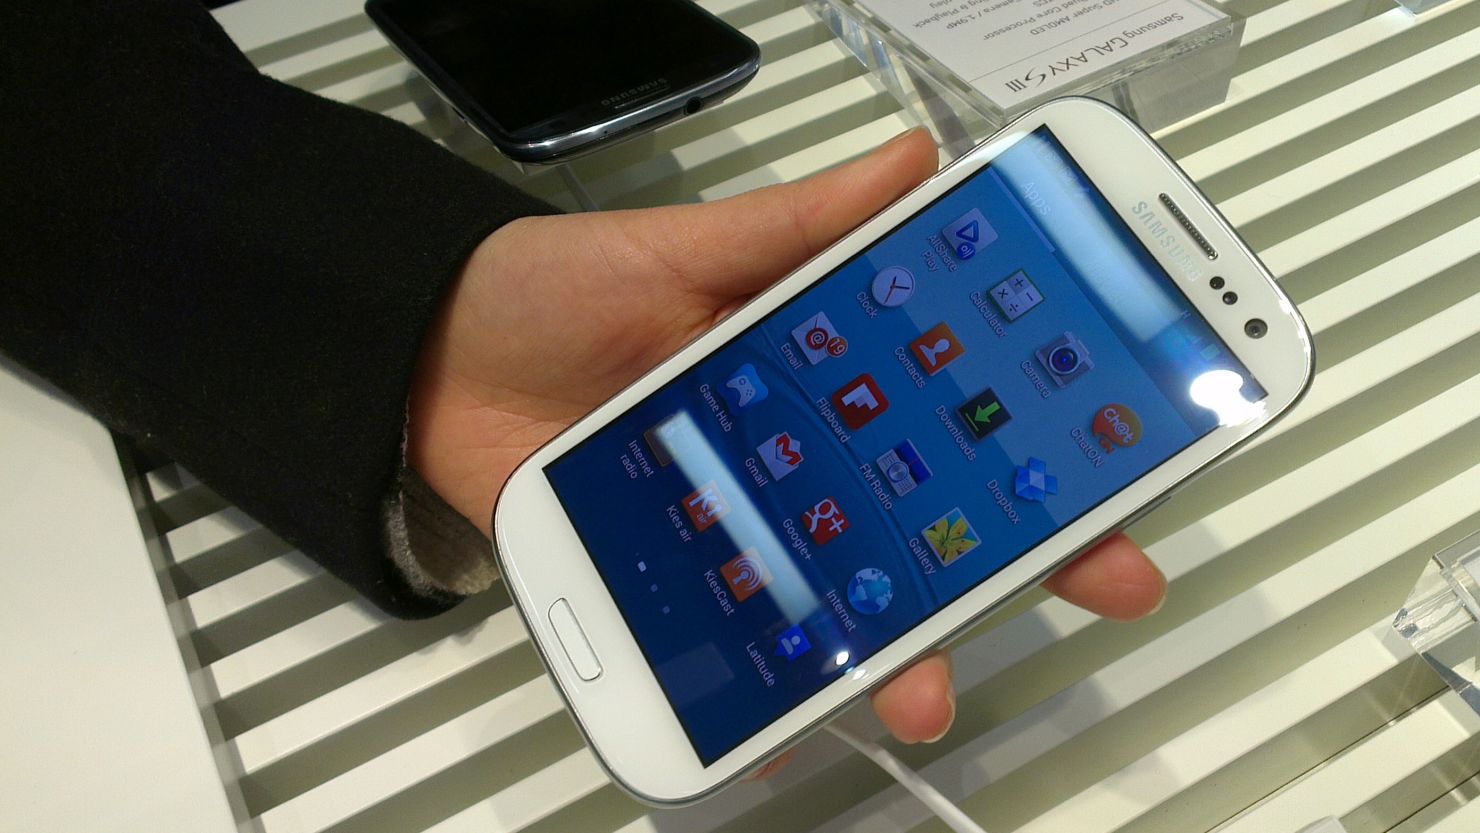 The Samsung Galaxy S, unveiled Thursday in London, has a huge 4.8-inch display screen